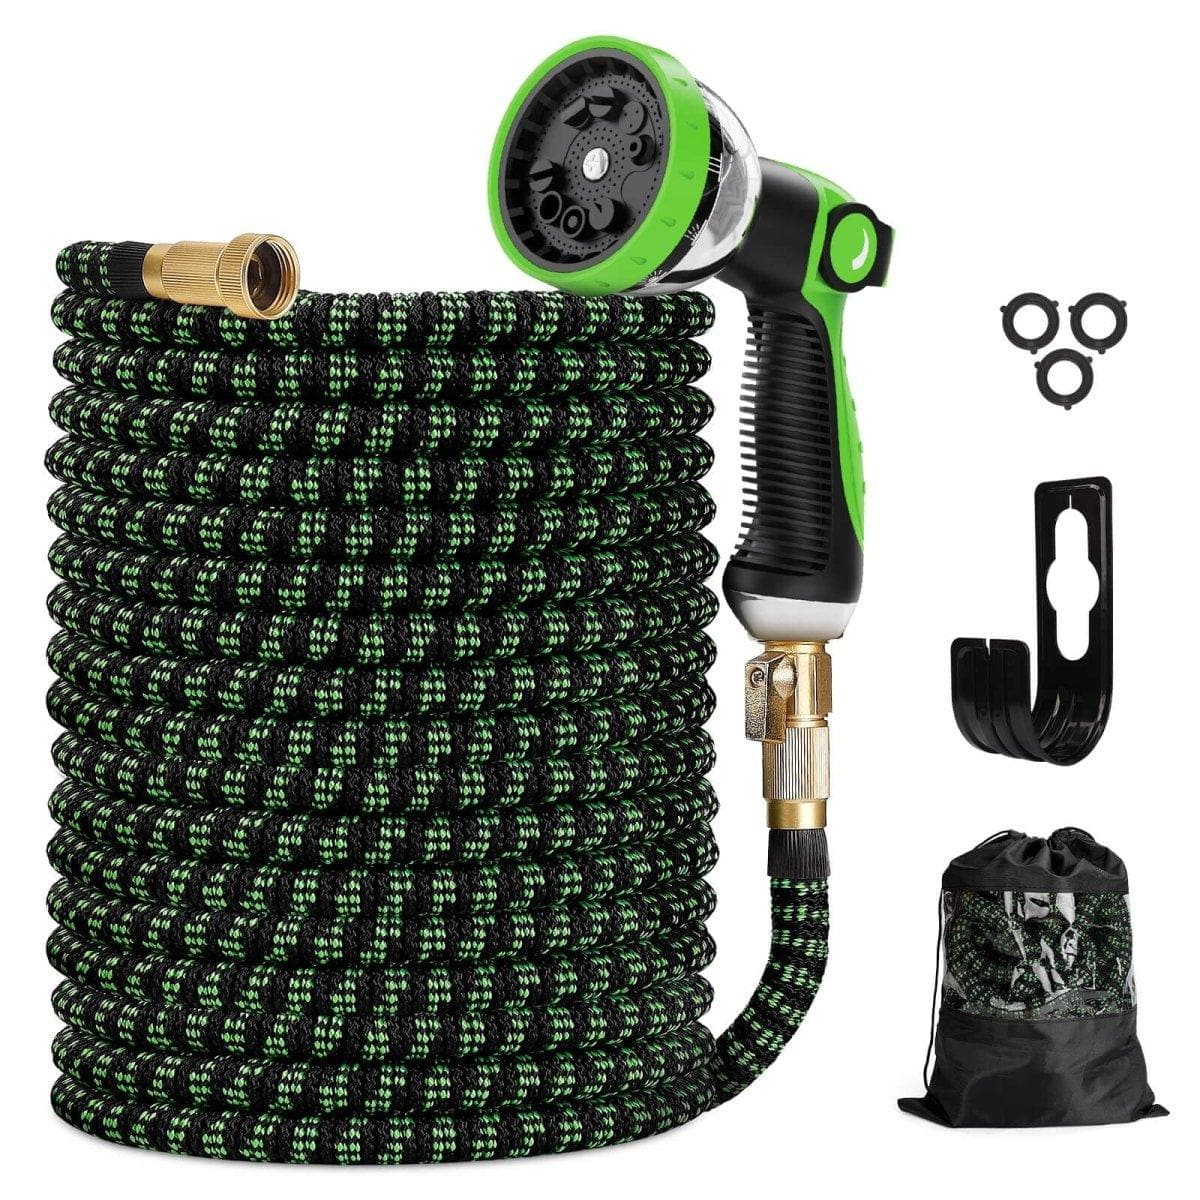 Huepar Flexible 100ft Garden Hose with 4-Layer Latex, 10 Function Spray Nozzle, and Solid Brass Fittings for Efficient Irrigation4